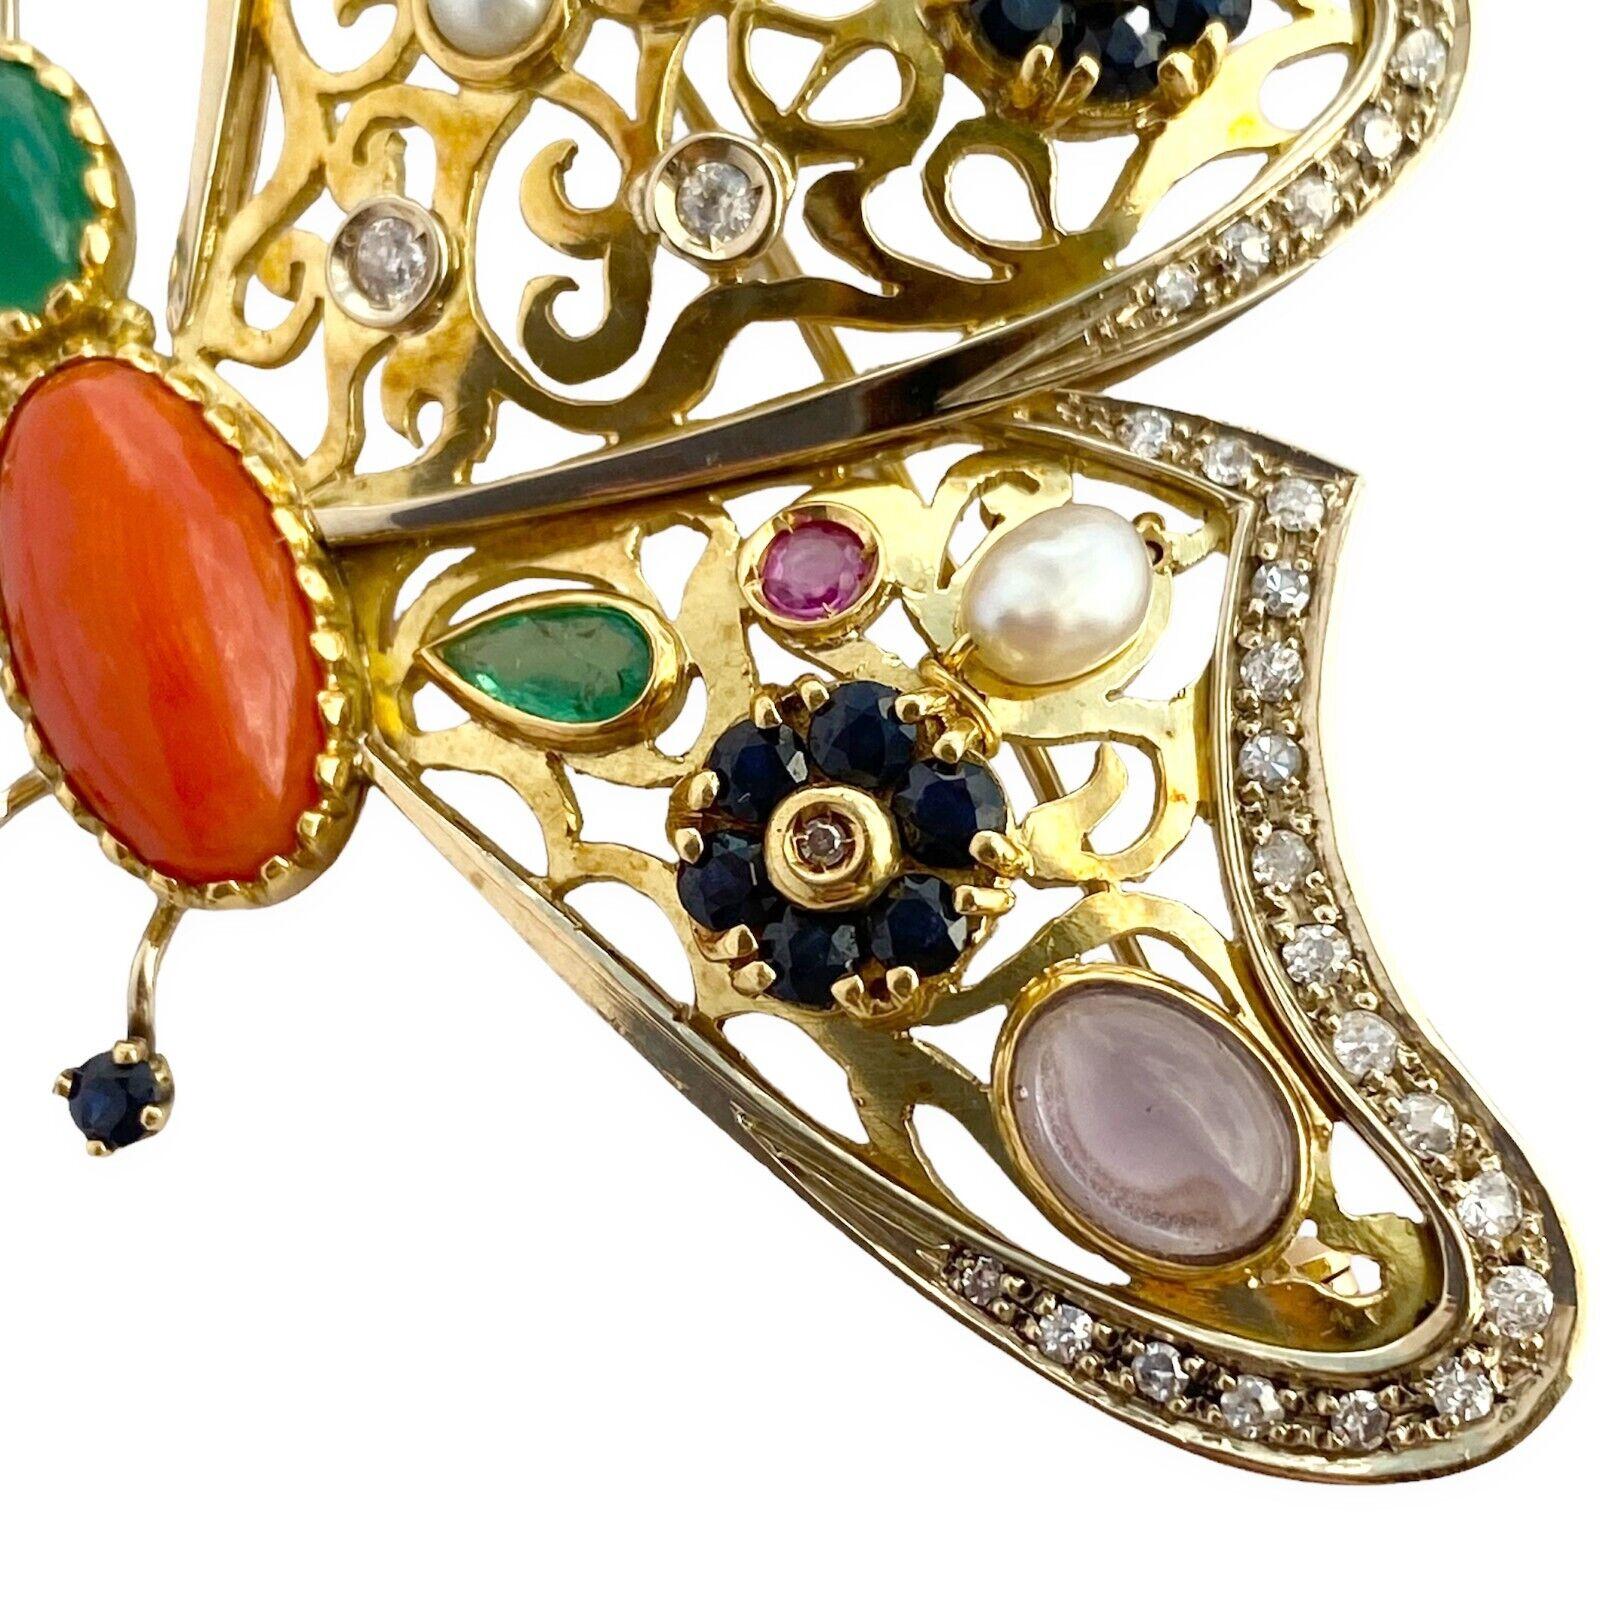 Antique 18k Gold Butterfly Brooch with Gemstones: Sapphire Diamonds Emerald In Excellent Condition For Sale In Los Angeles, CA